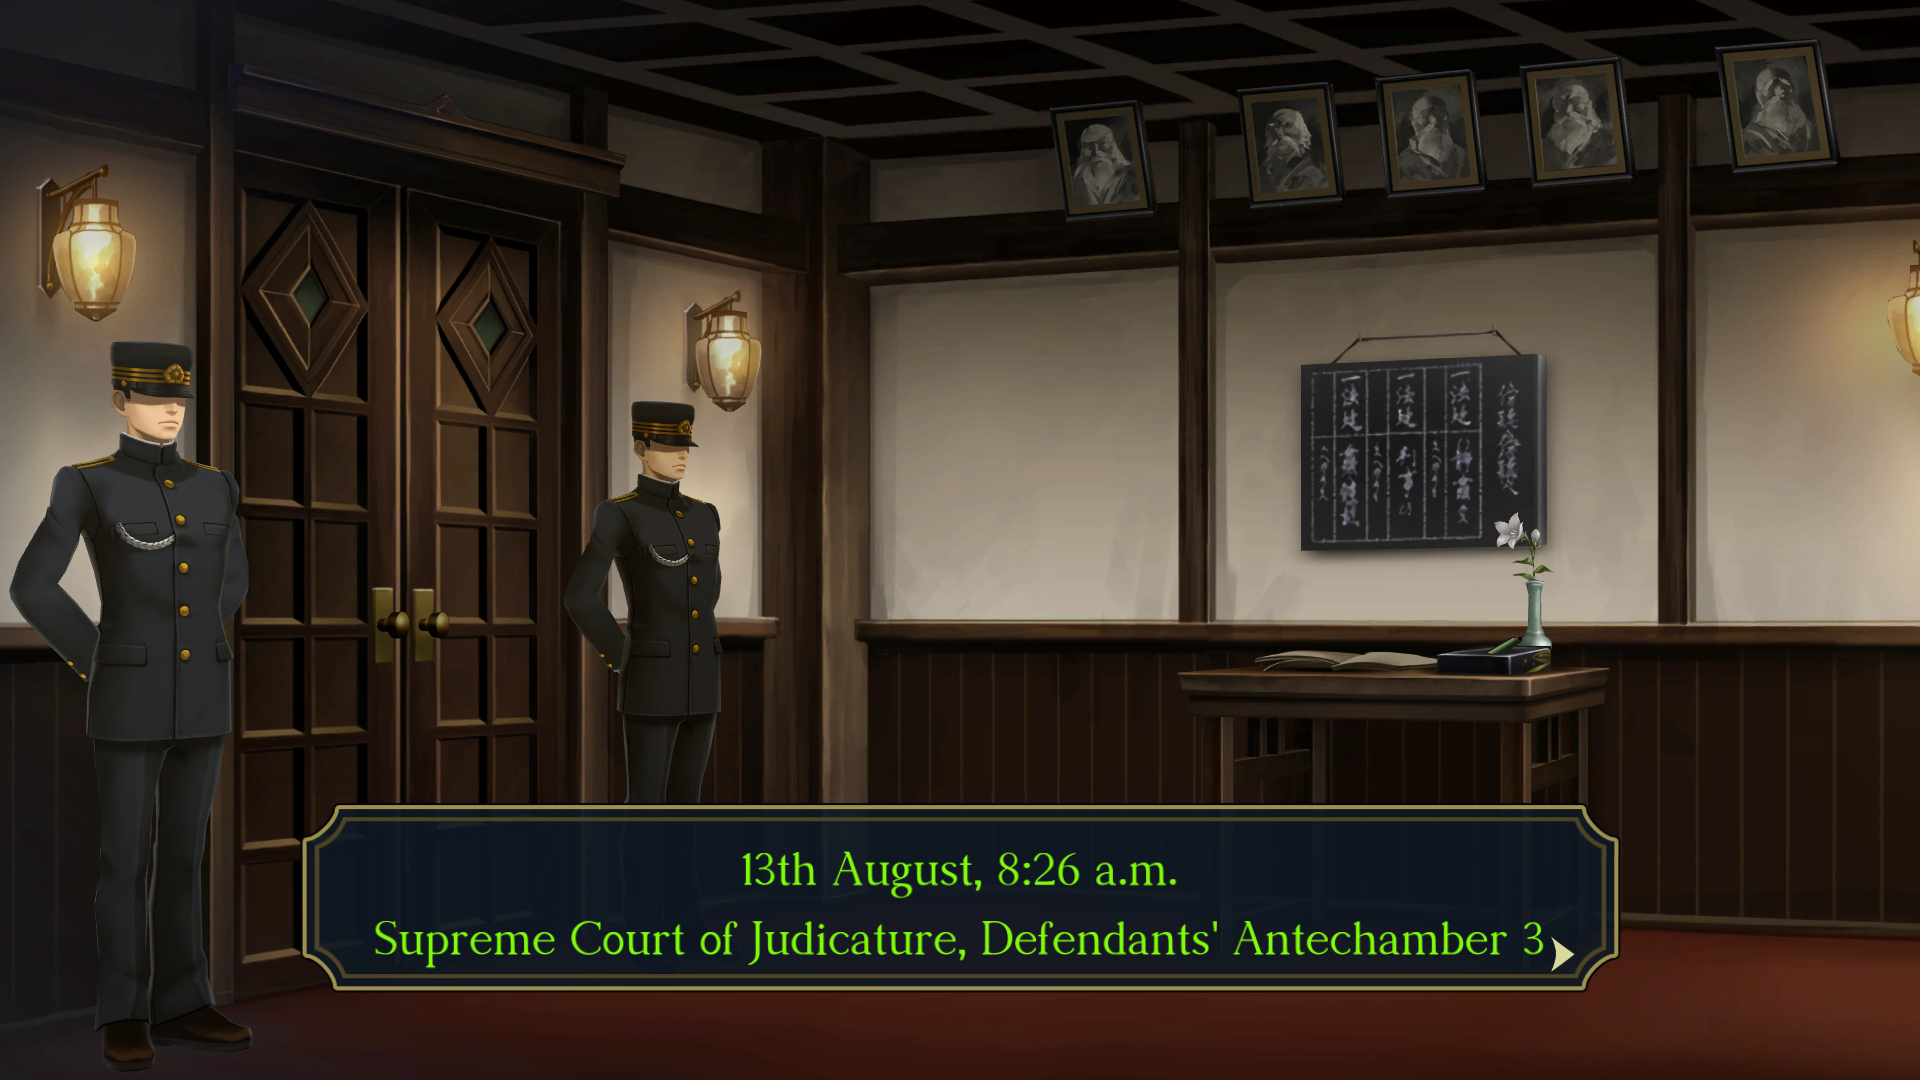 The Great Ace Attorney Chronicles - "13th August, 8:26 a.m. Supreme Court of Judicature, Defendants' Antechamber 3."